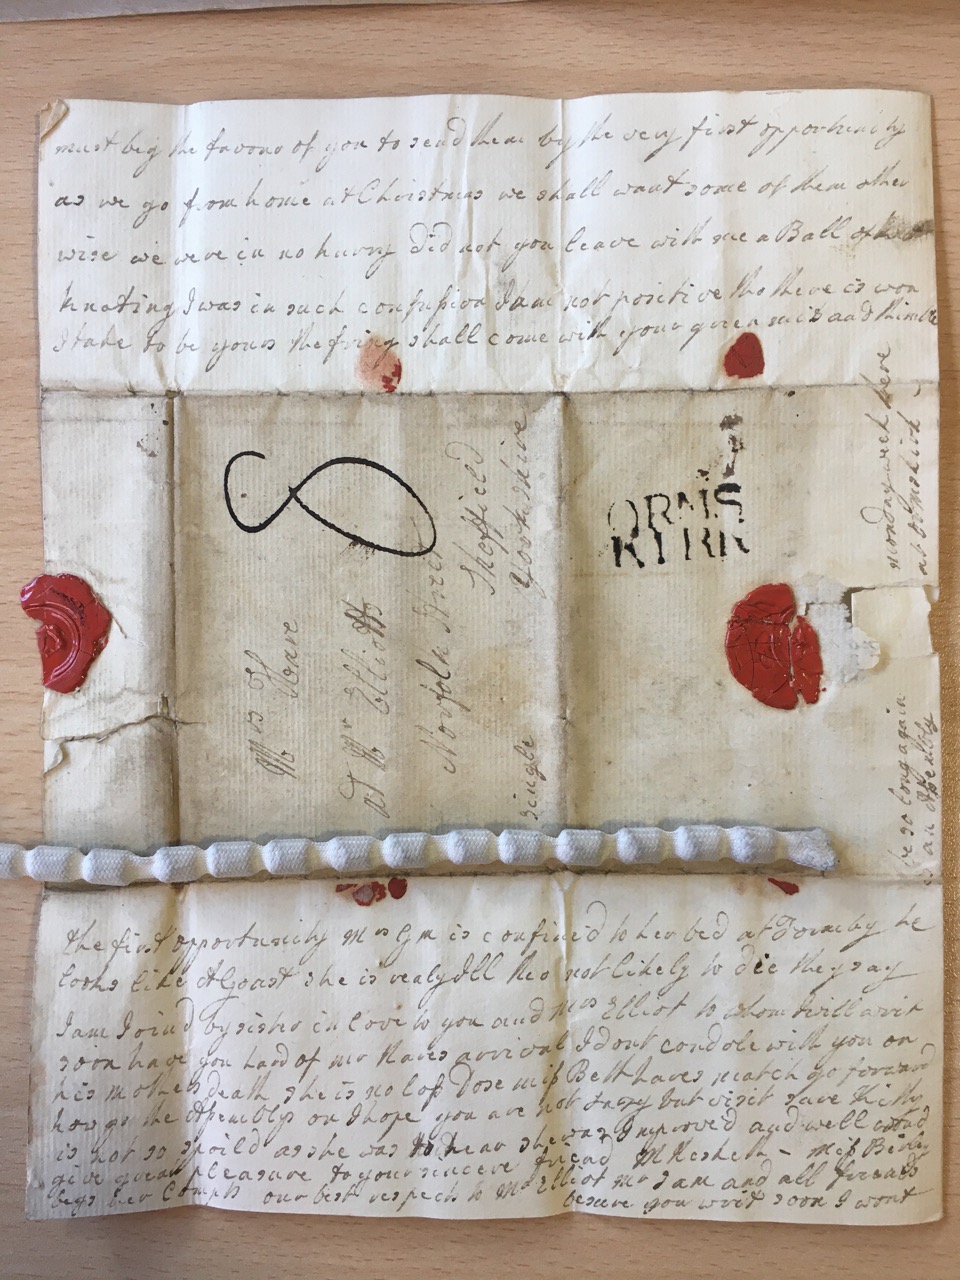 Image #4 of letter: Mary Ann Hesketh to Ann Hare, 2 December